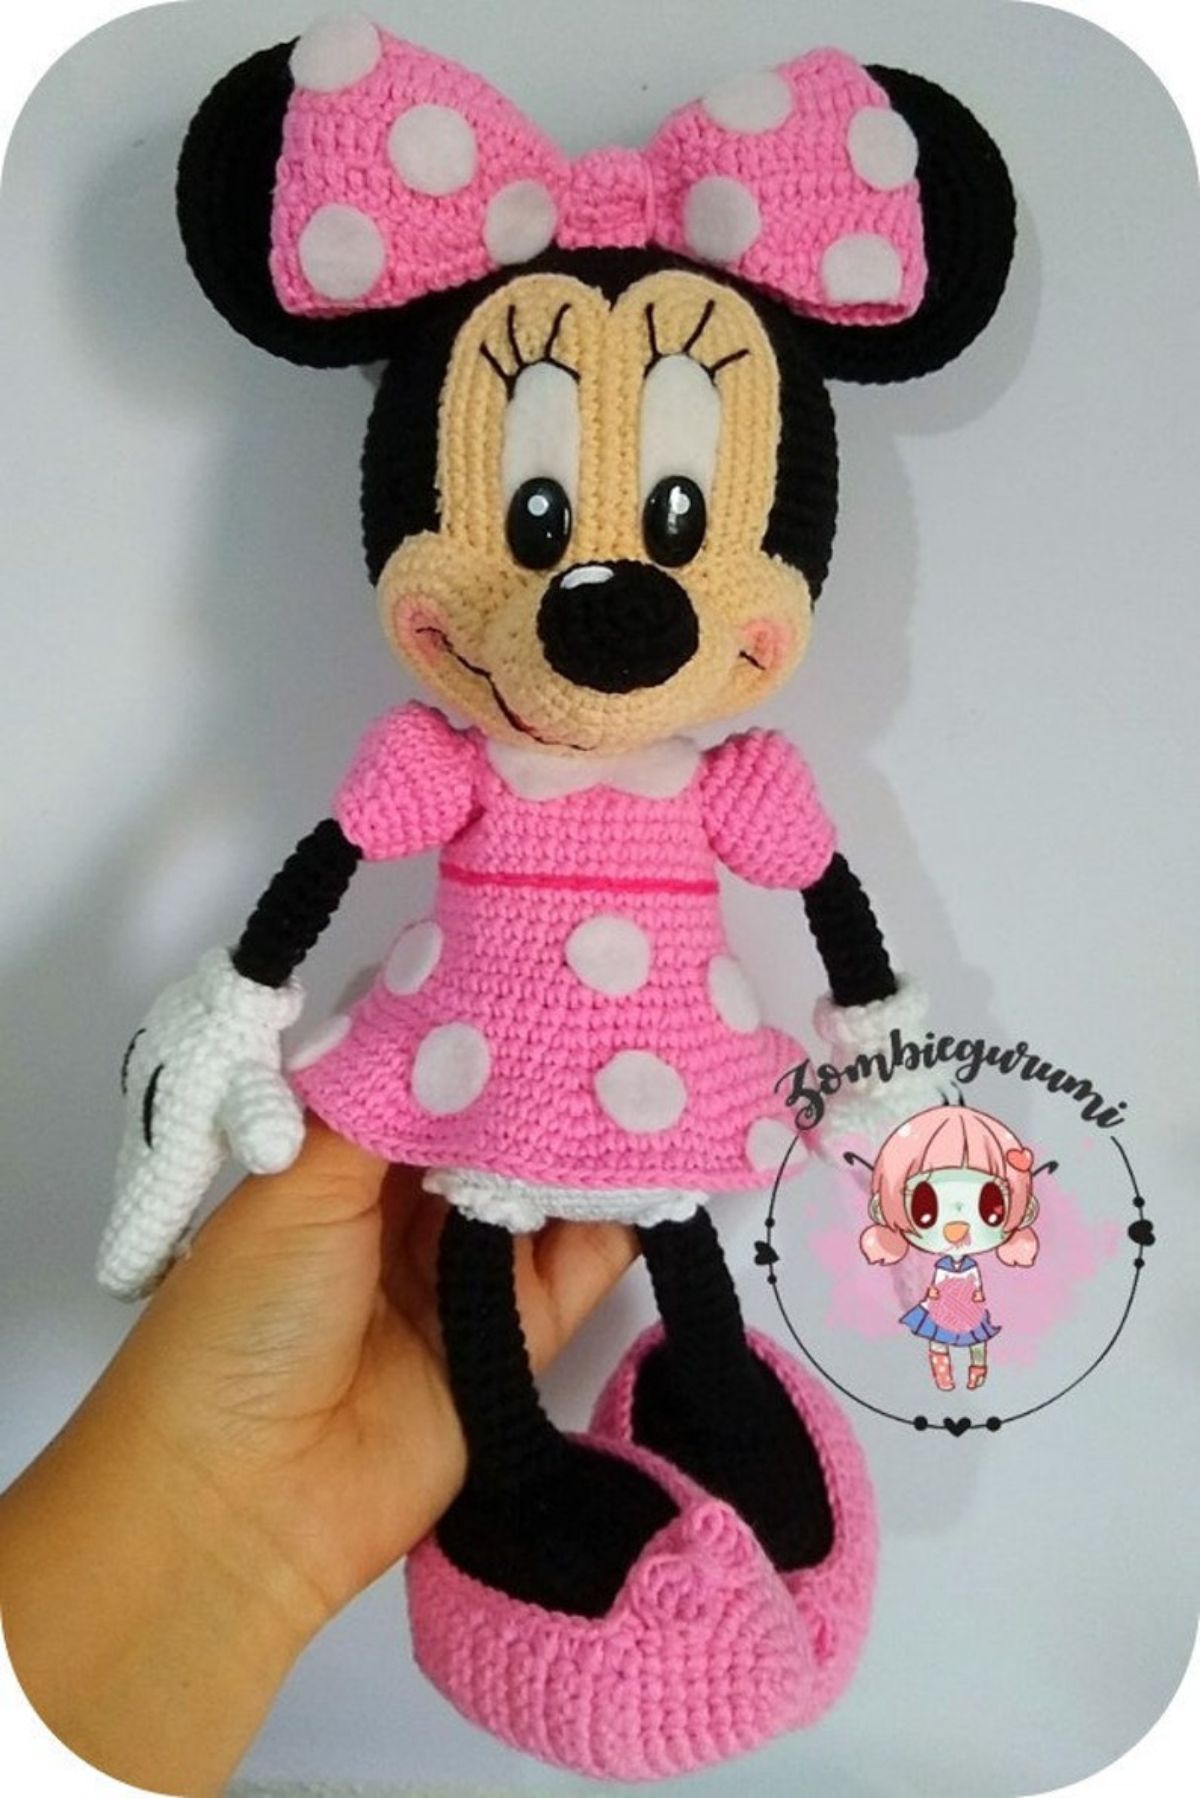 Large crochet Minnie mouse toy wearing a pink and white spotty dress, matching bow, and pink shoes.